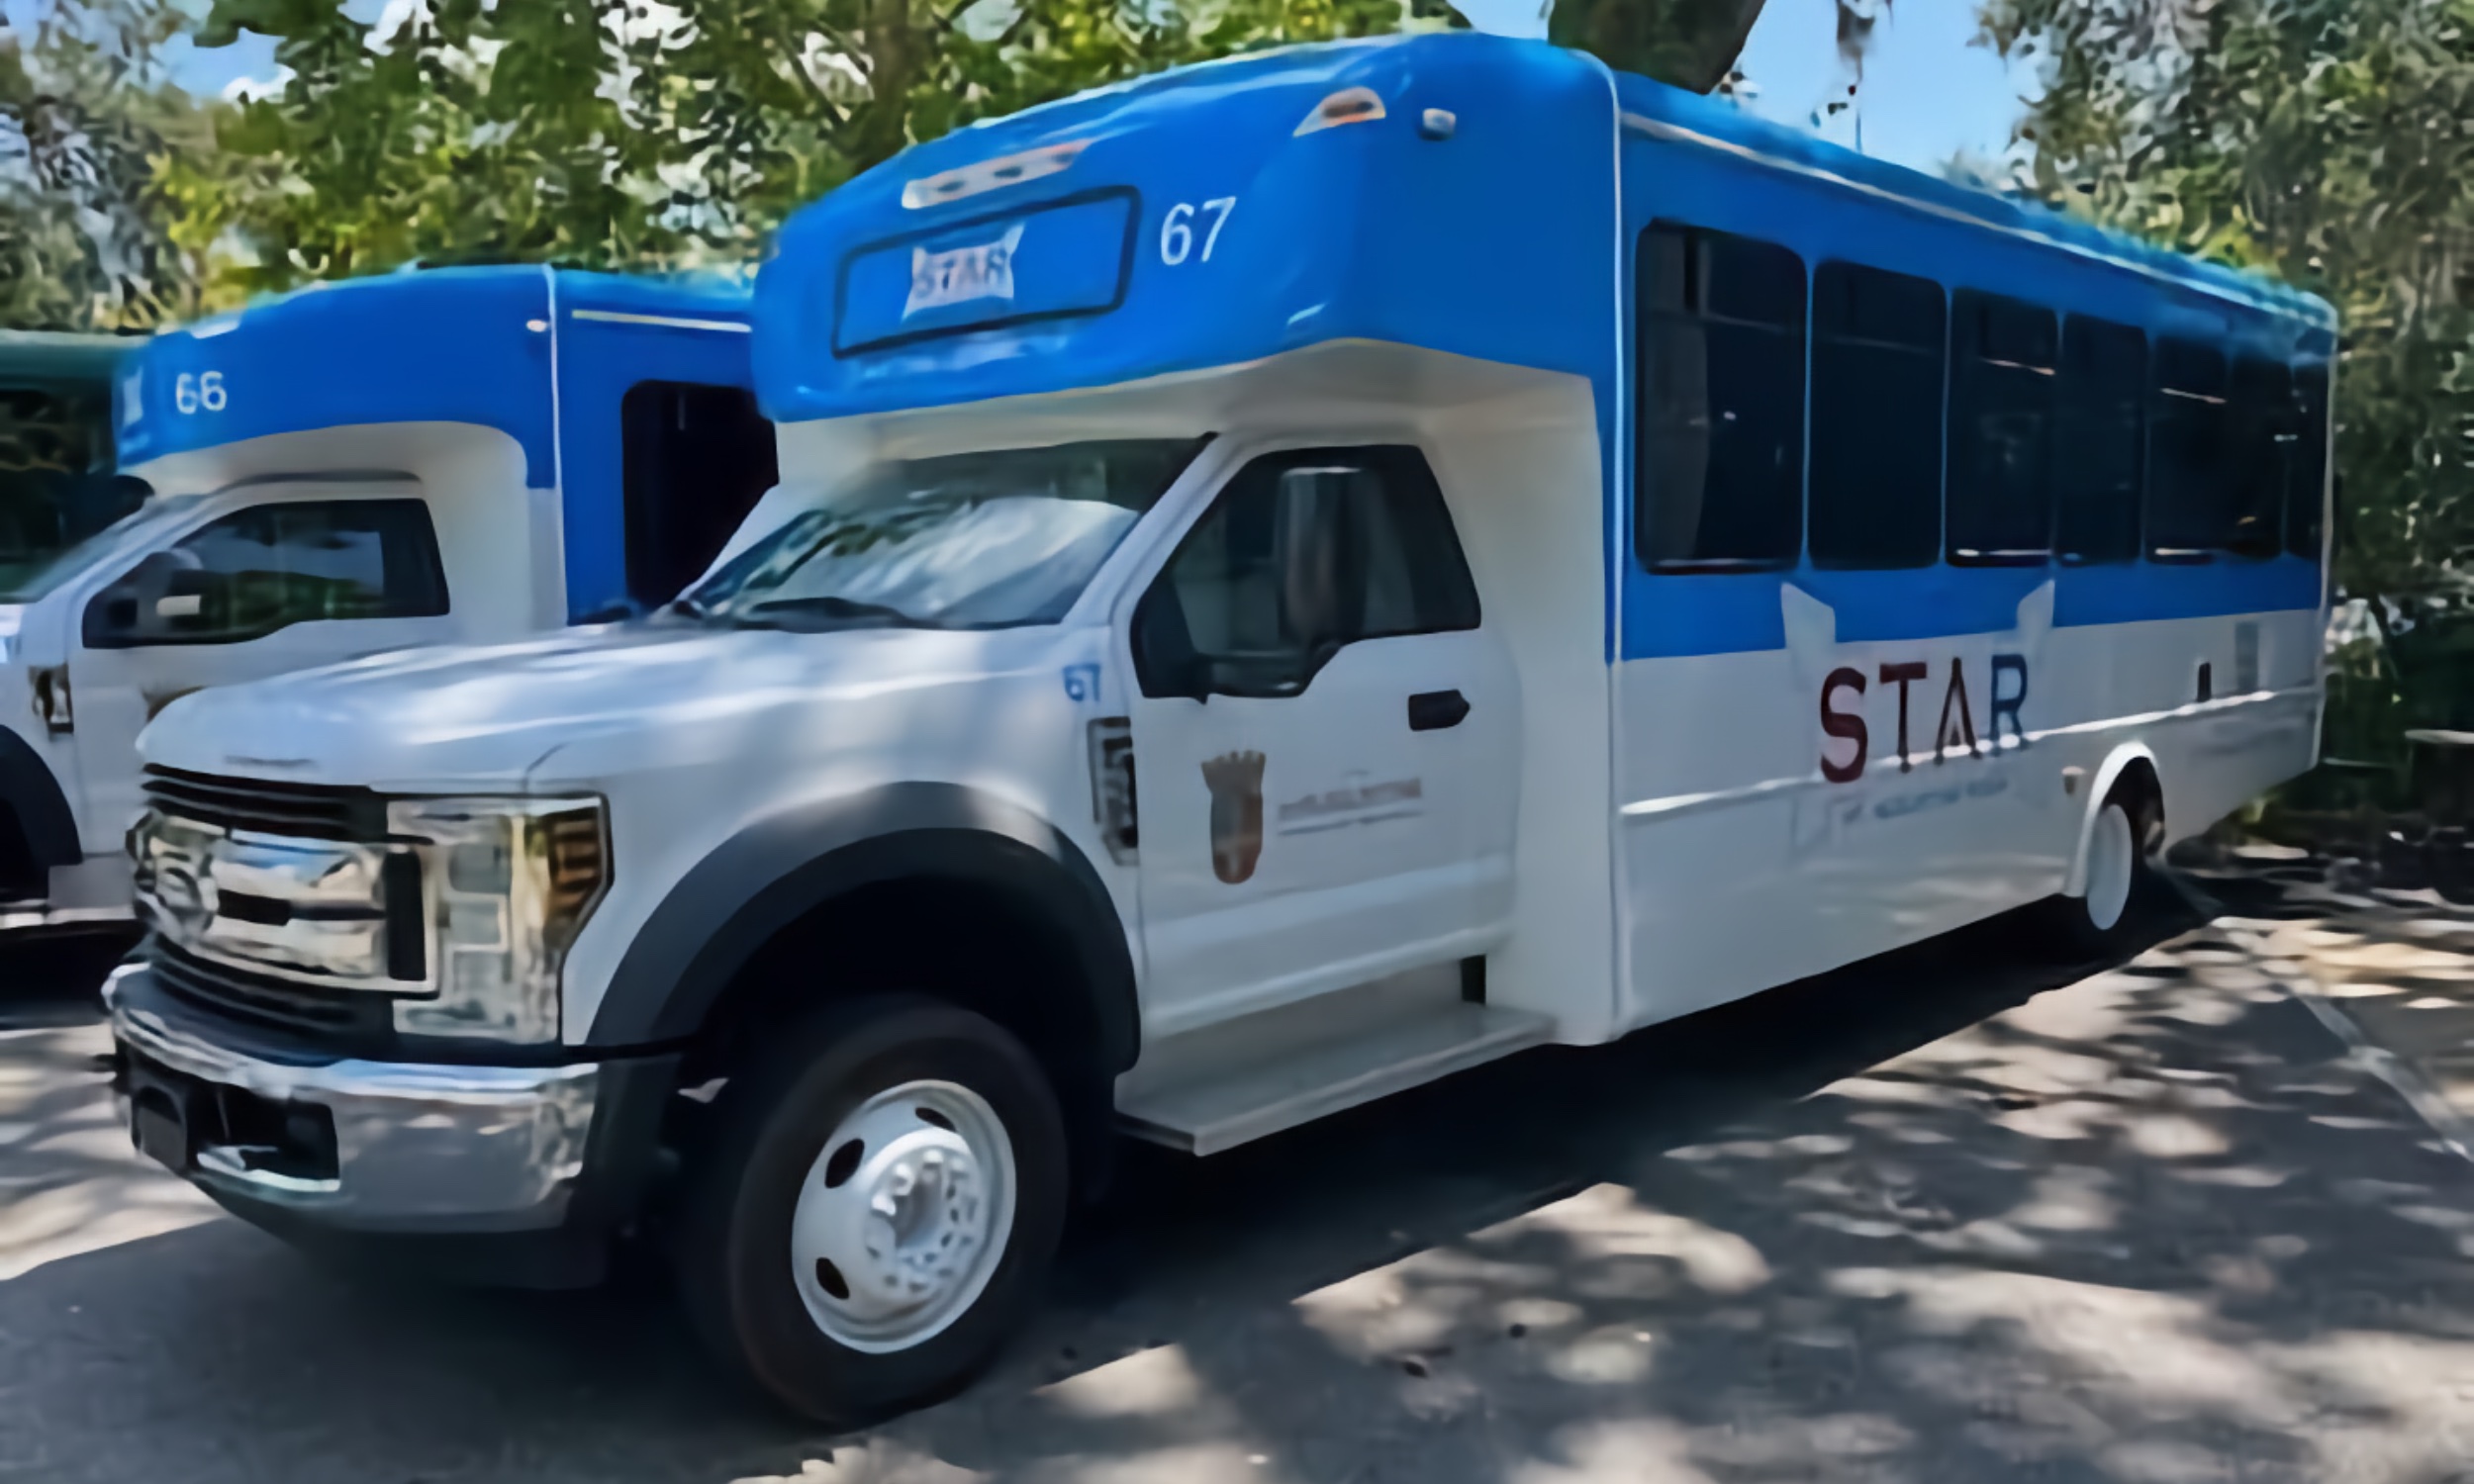 STAR Circulator (St. Augustine Rider) bus — Free shuttle service provided by the City of St. Augustine